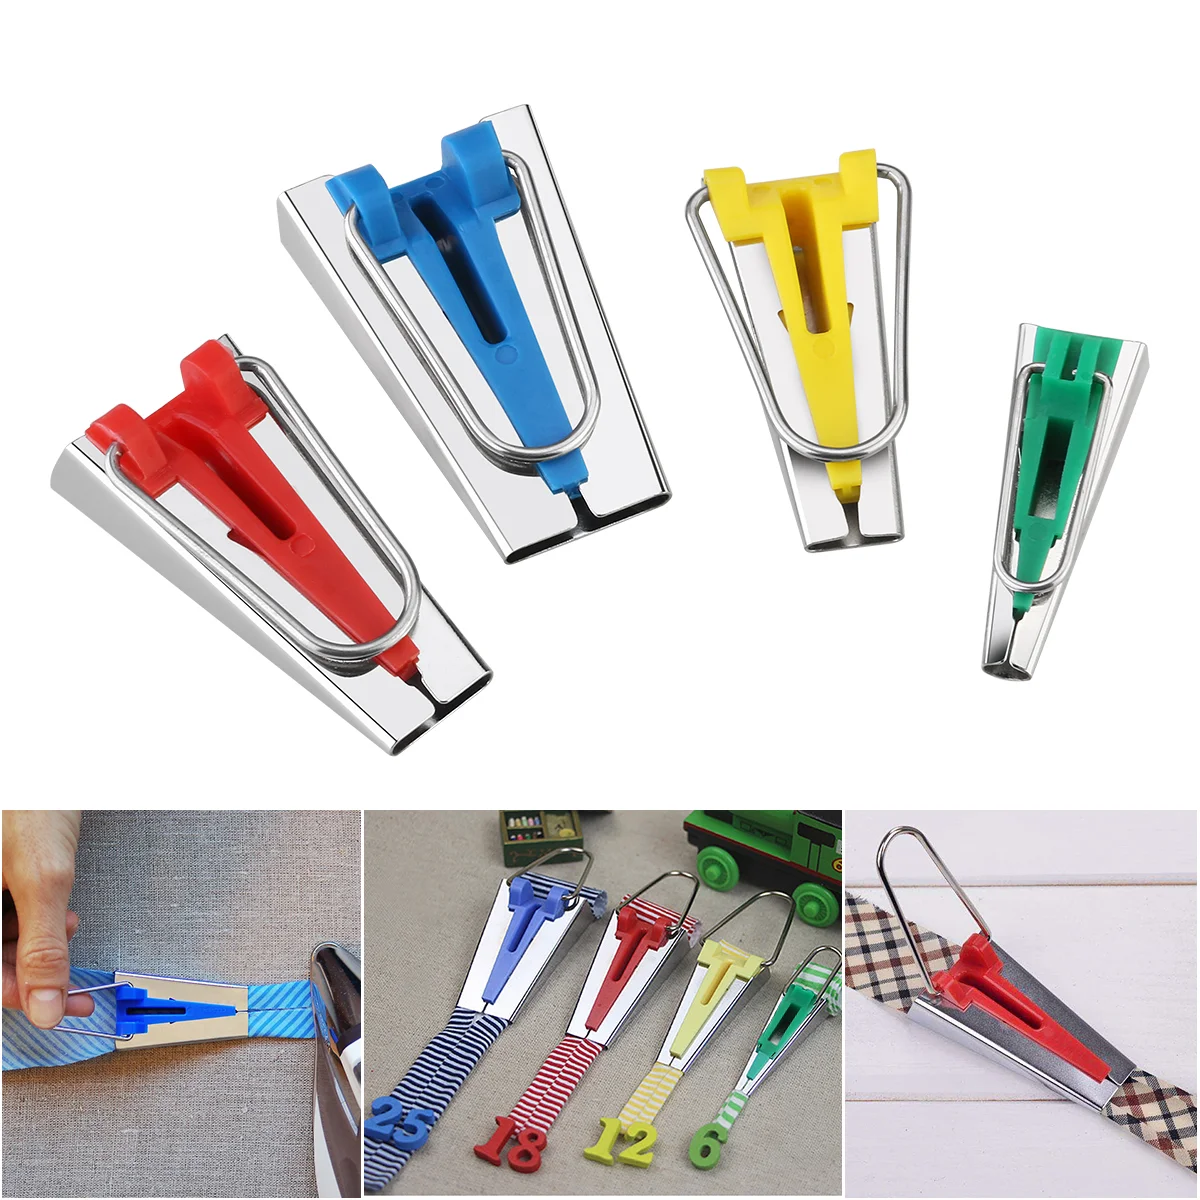 

4 Sizes 6mm 12mm 18mm 25mm Reusable Portable Useful Fabric Bias Tape Makers Sewing Quilting Tools Binding Tools for Men